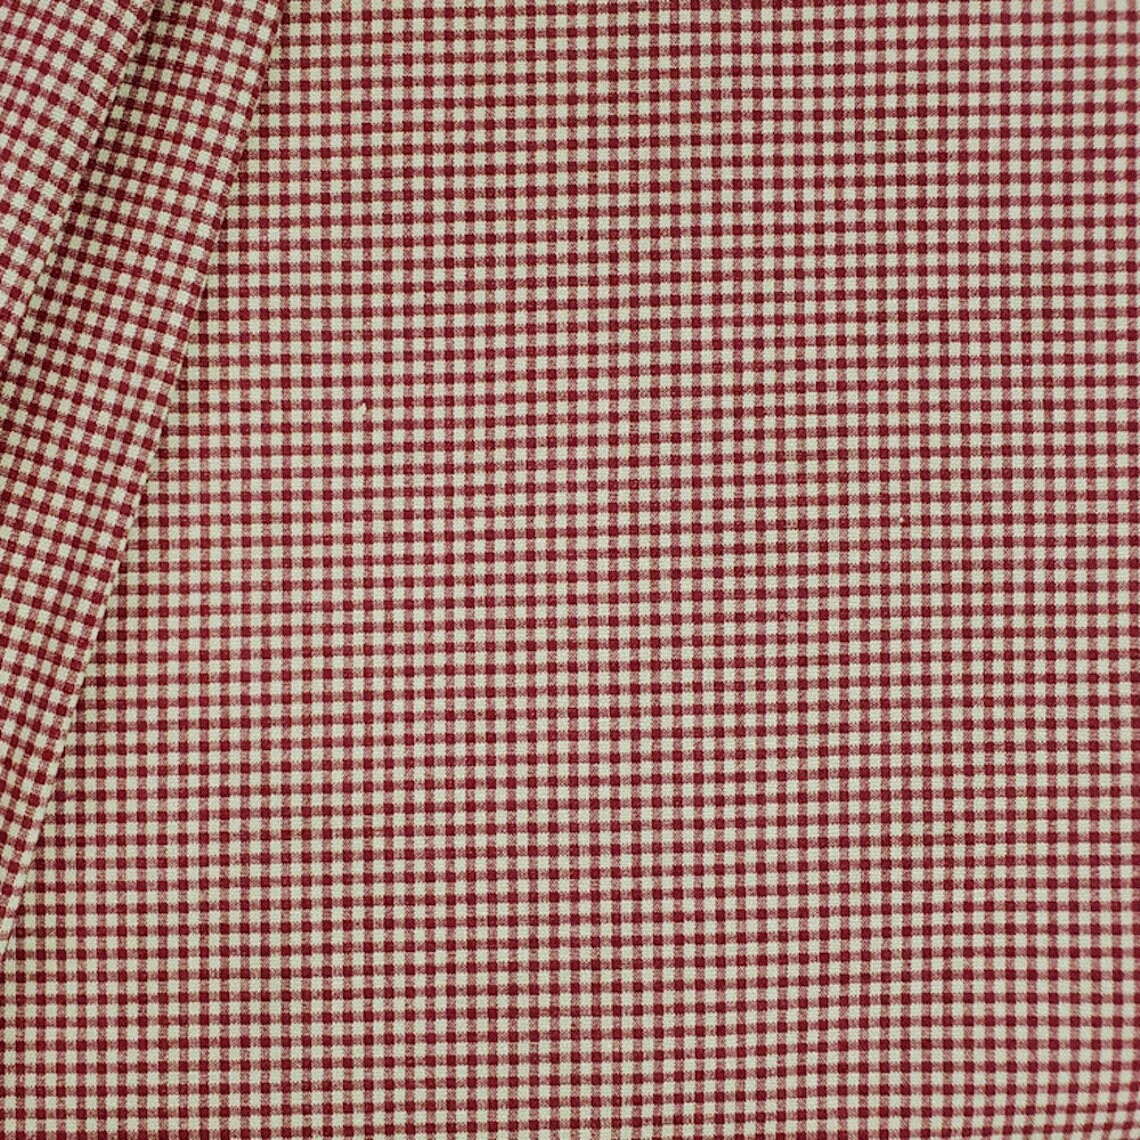 gathered crib skirt in farmhouse red gingham check on beige